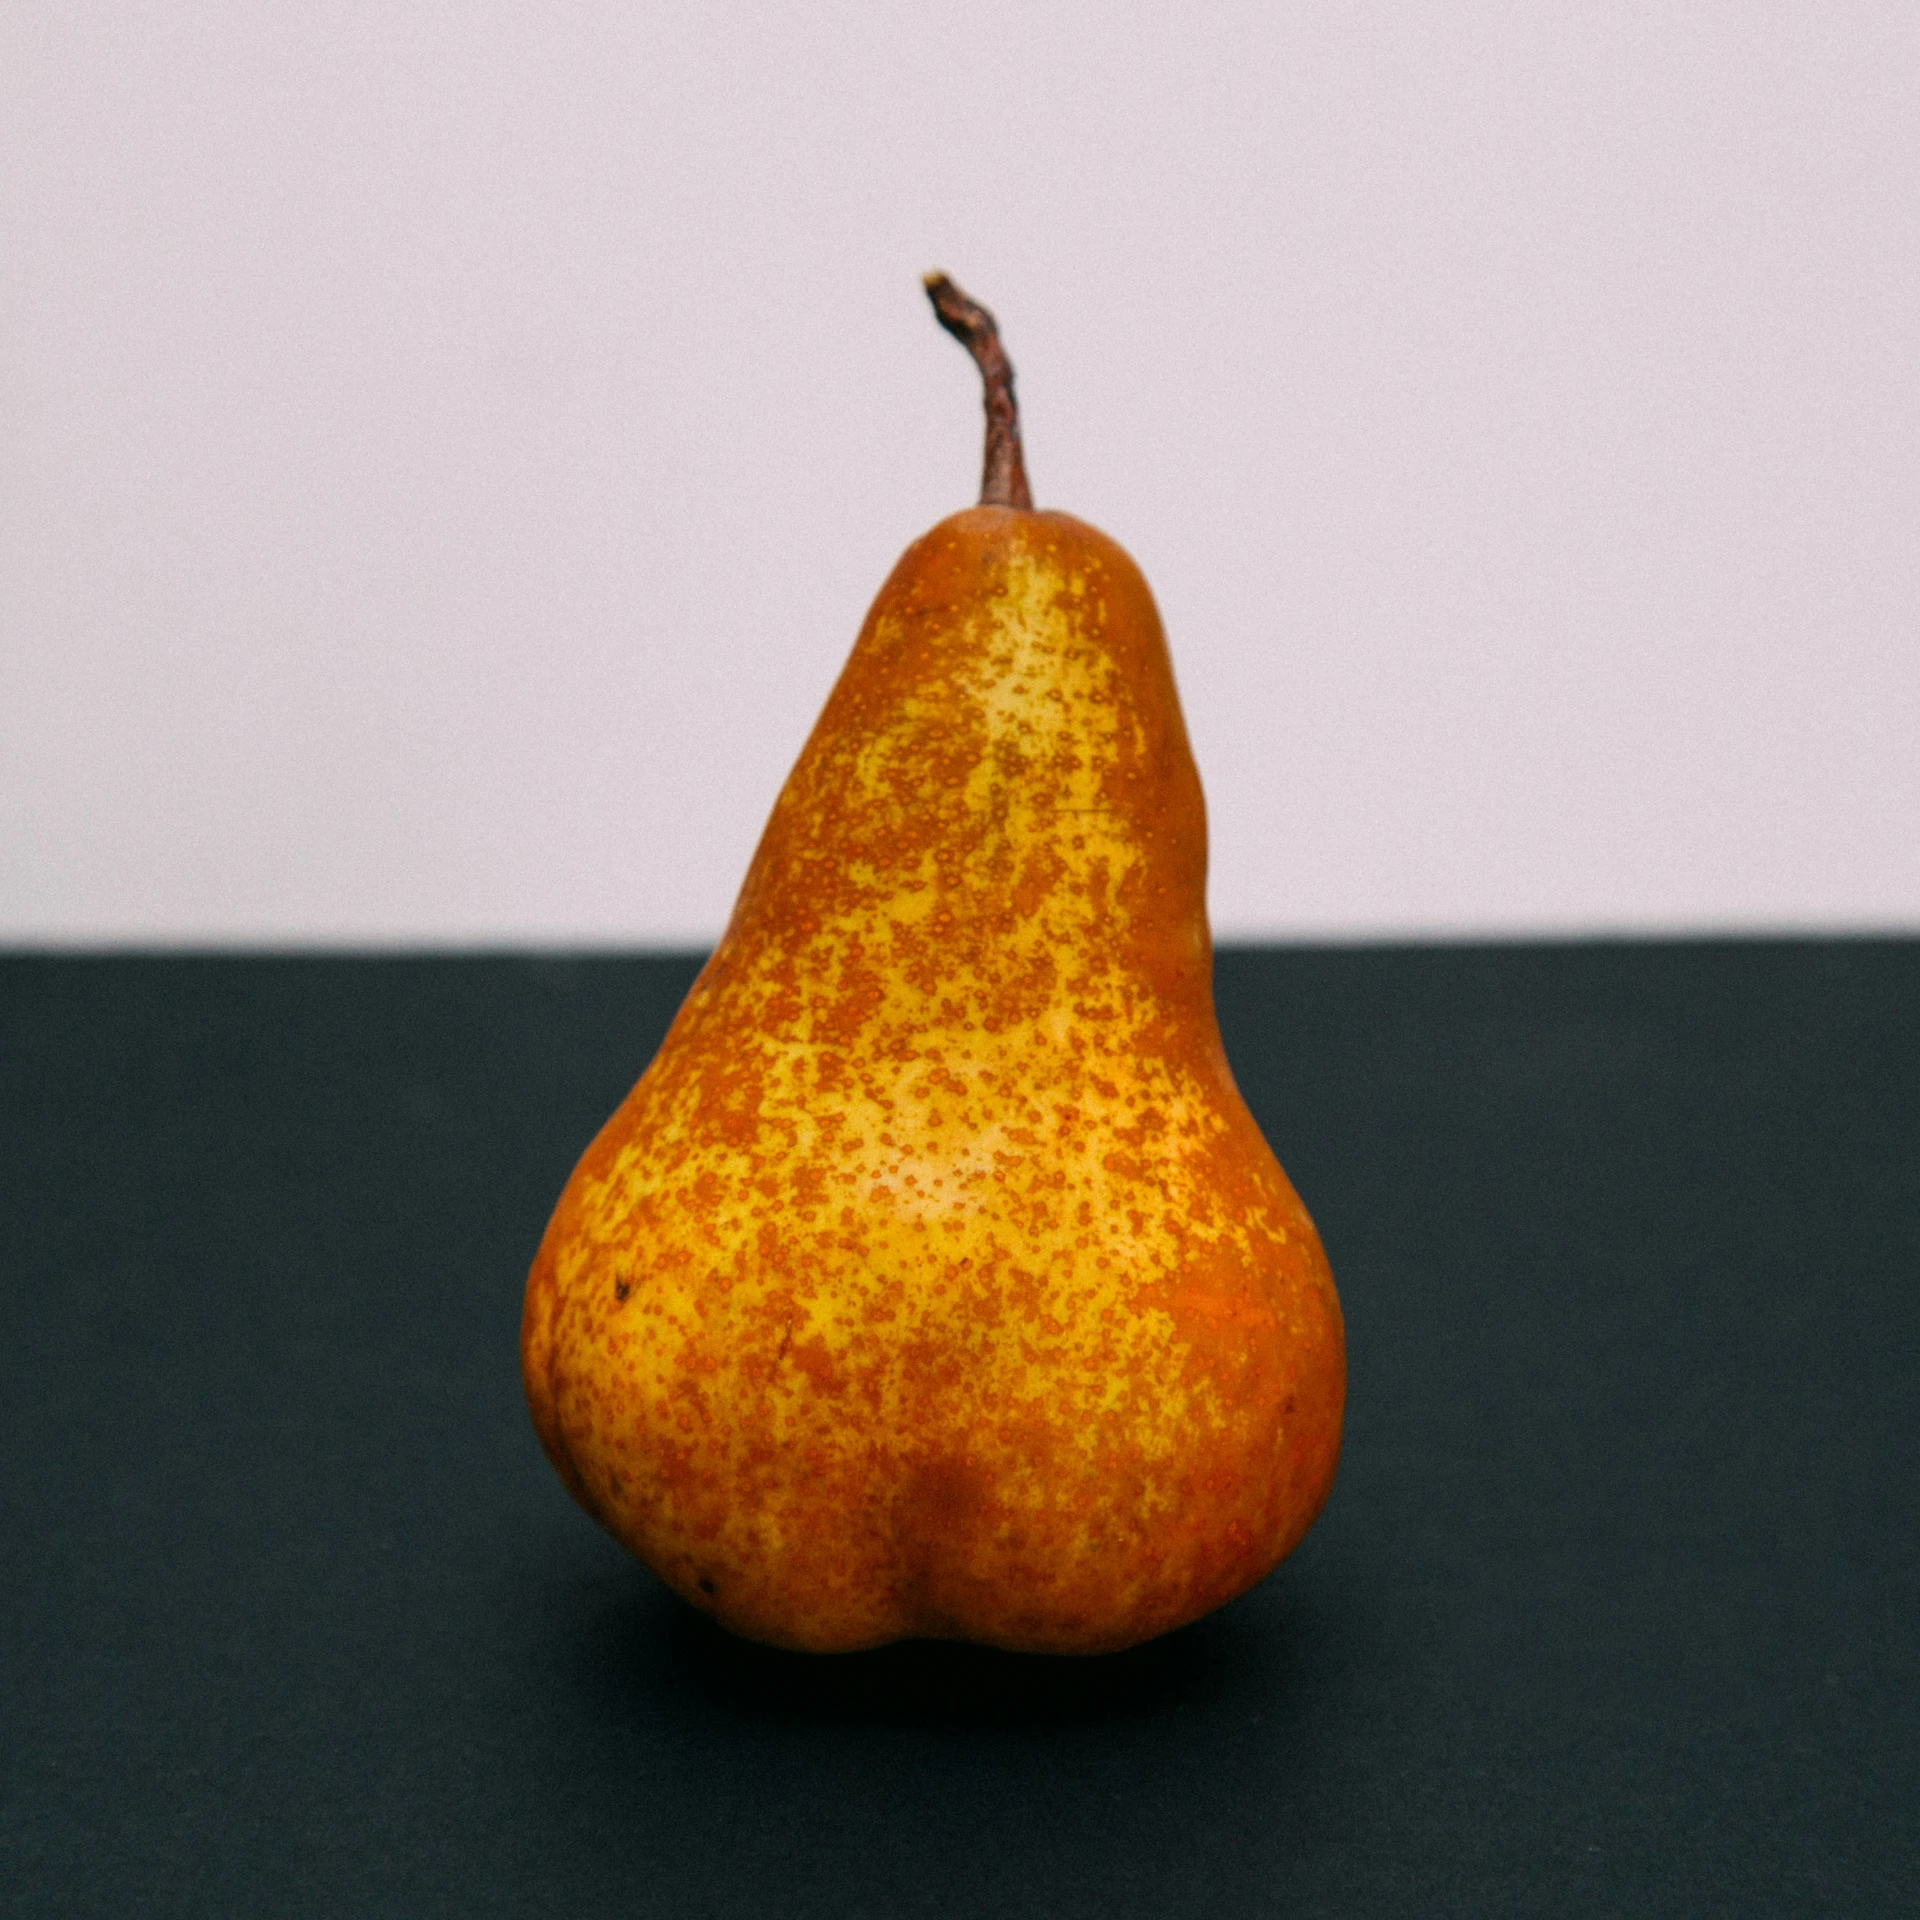 an orange on a dark table with a white wall